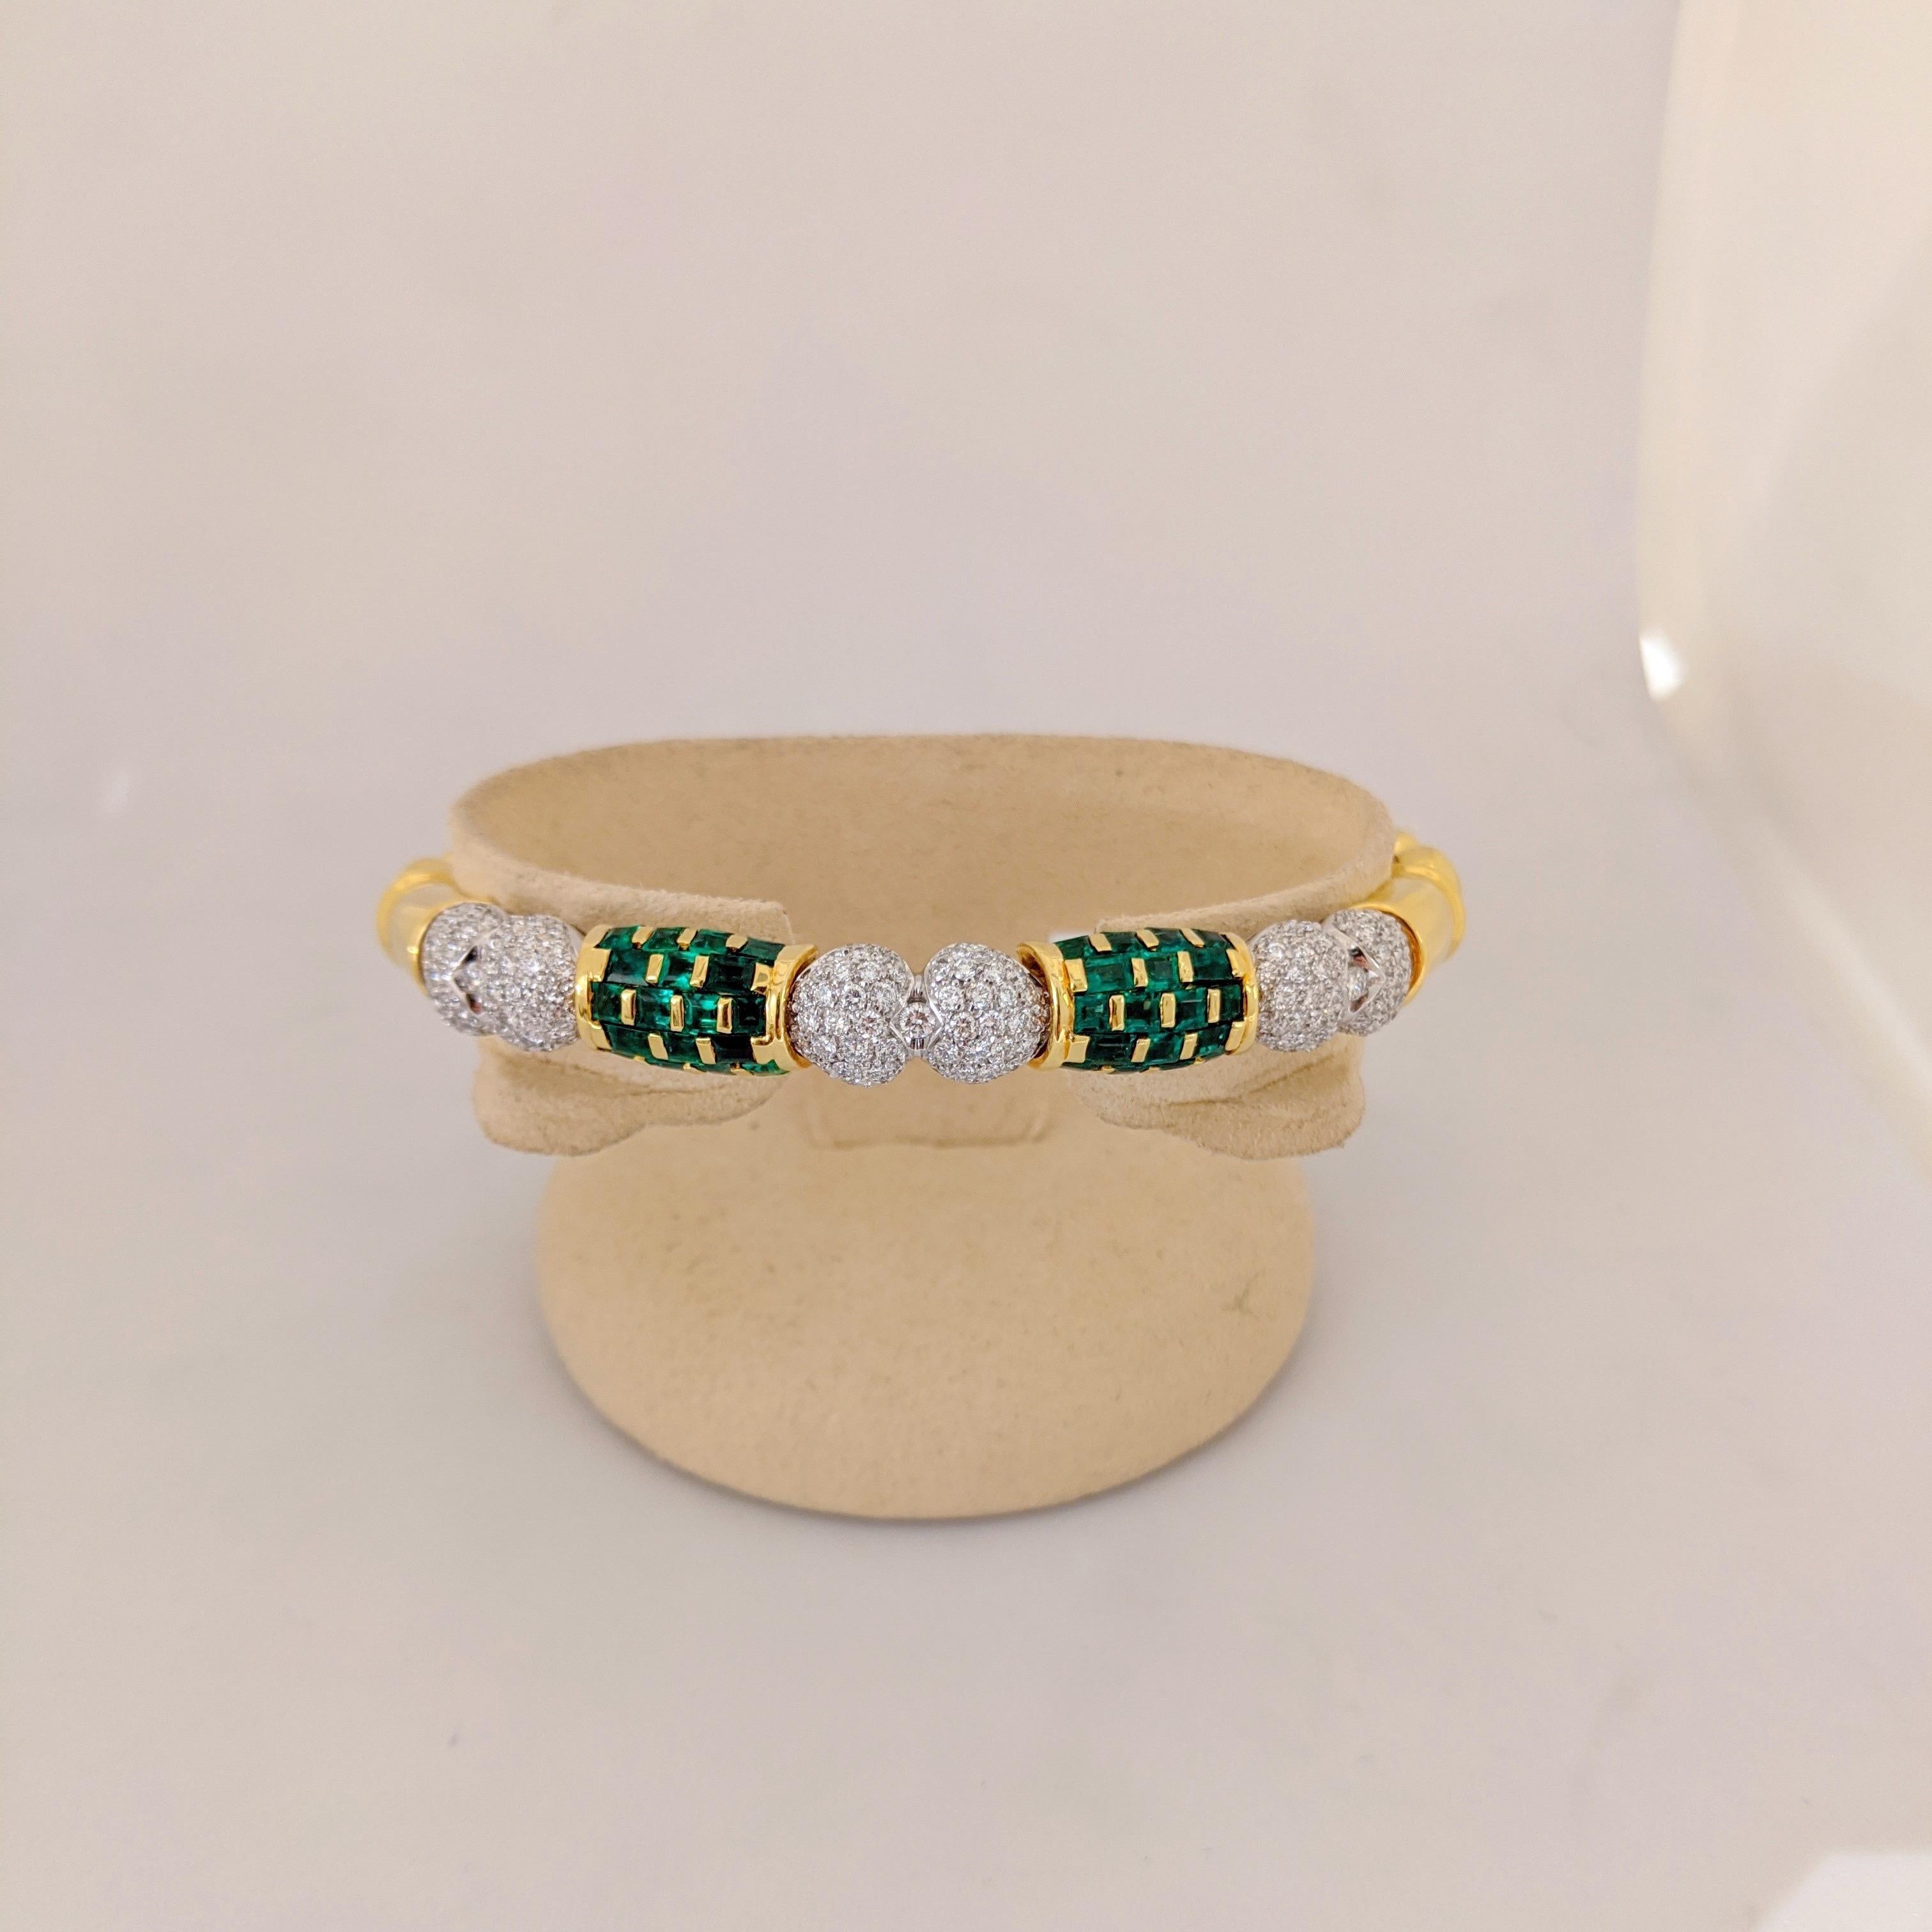 Founded in 1969 in Valenza, Italy RCM is well known for their classic designs in modern appeal.
This bracelet is a perfect example of their unique styling.
The 18 karat yellow gold flexible bracelet is designed with 2 sections which have been